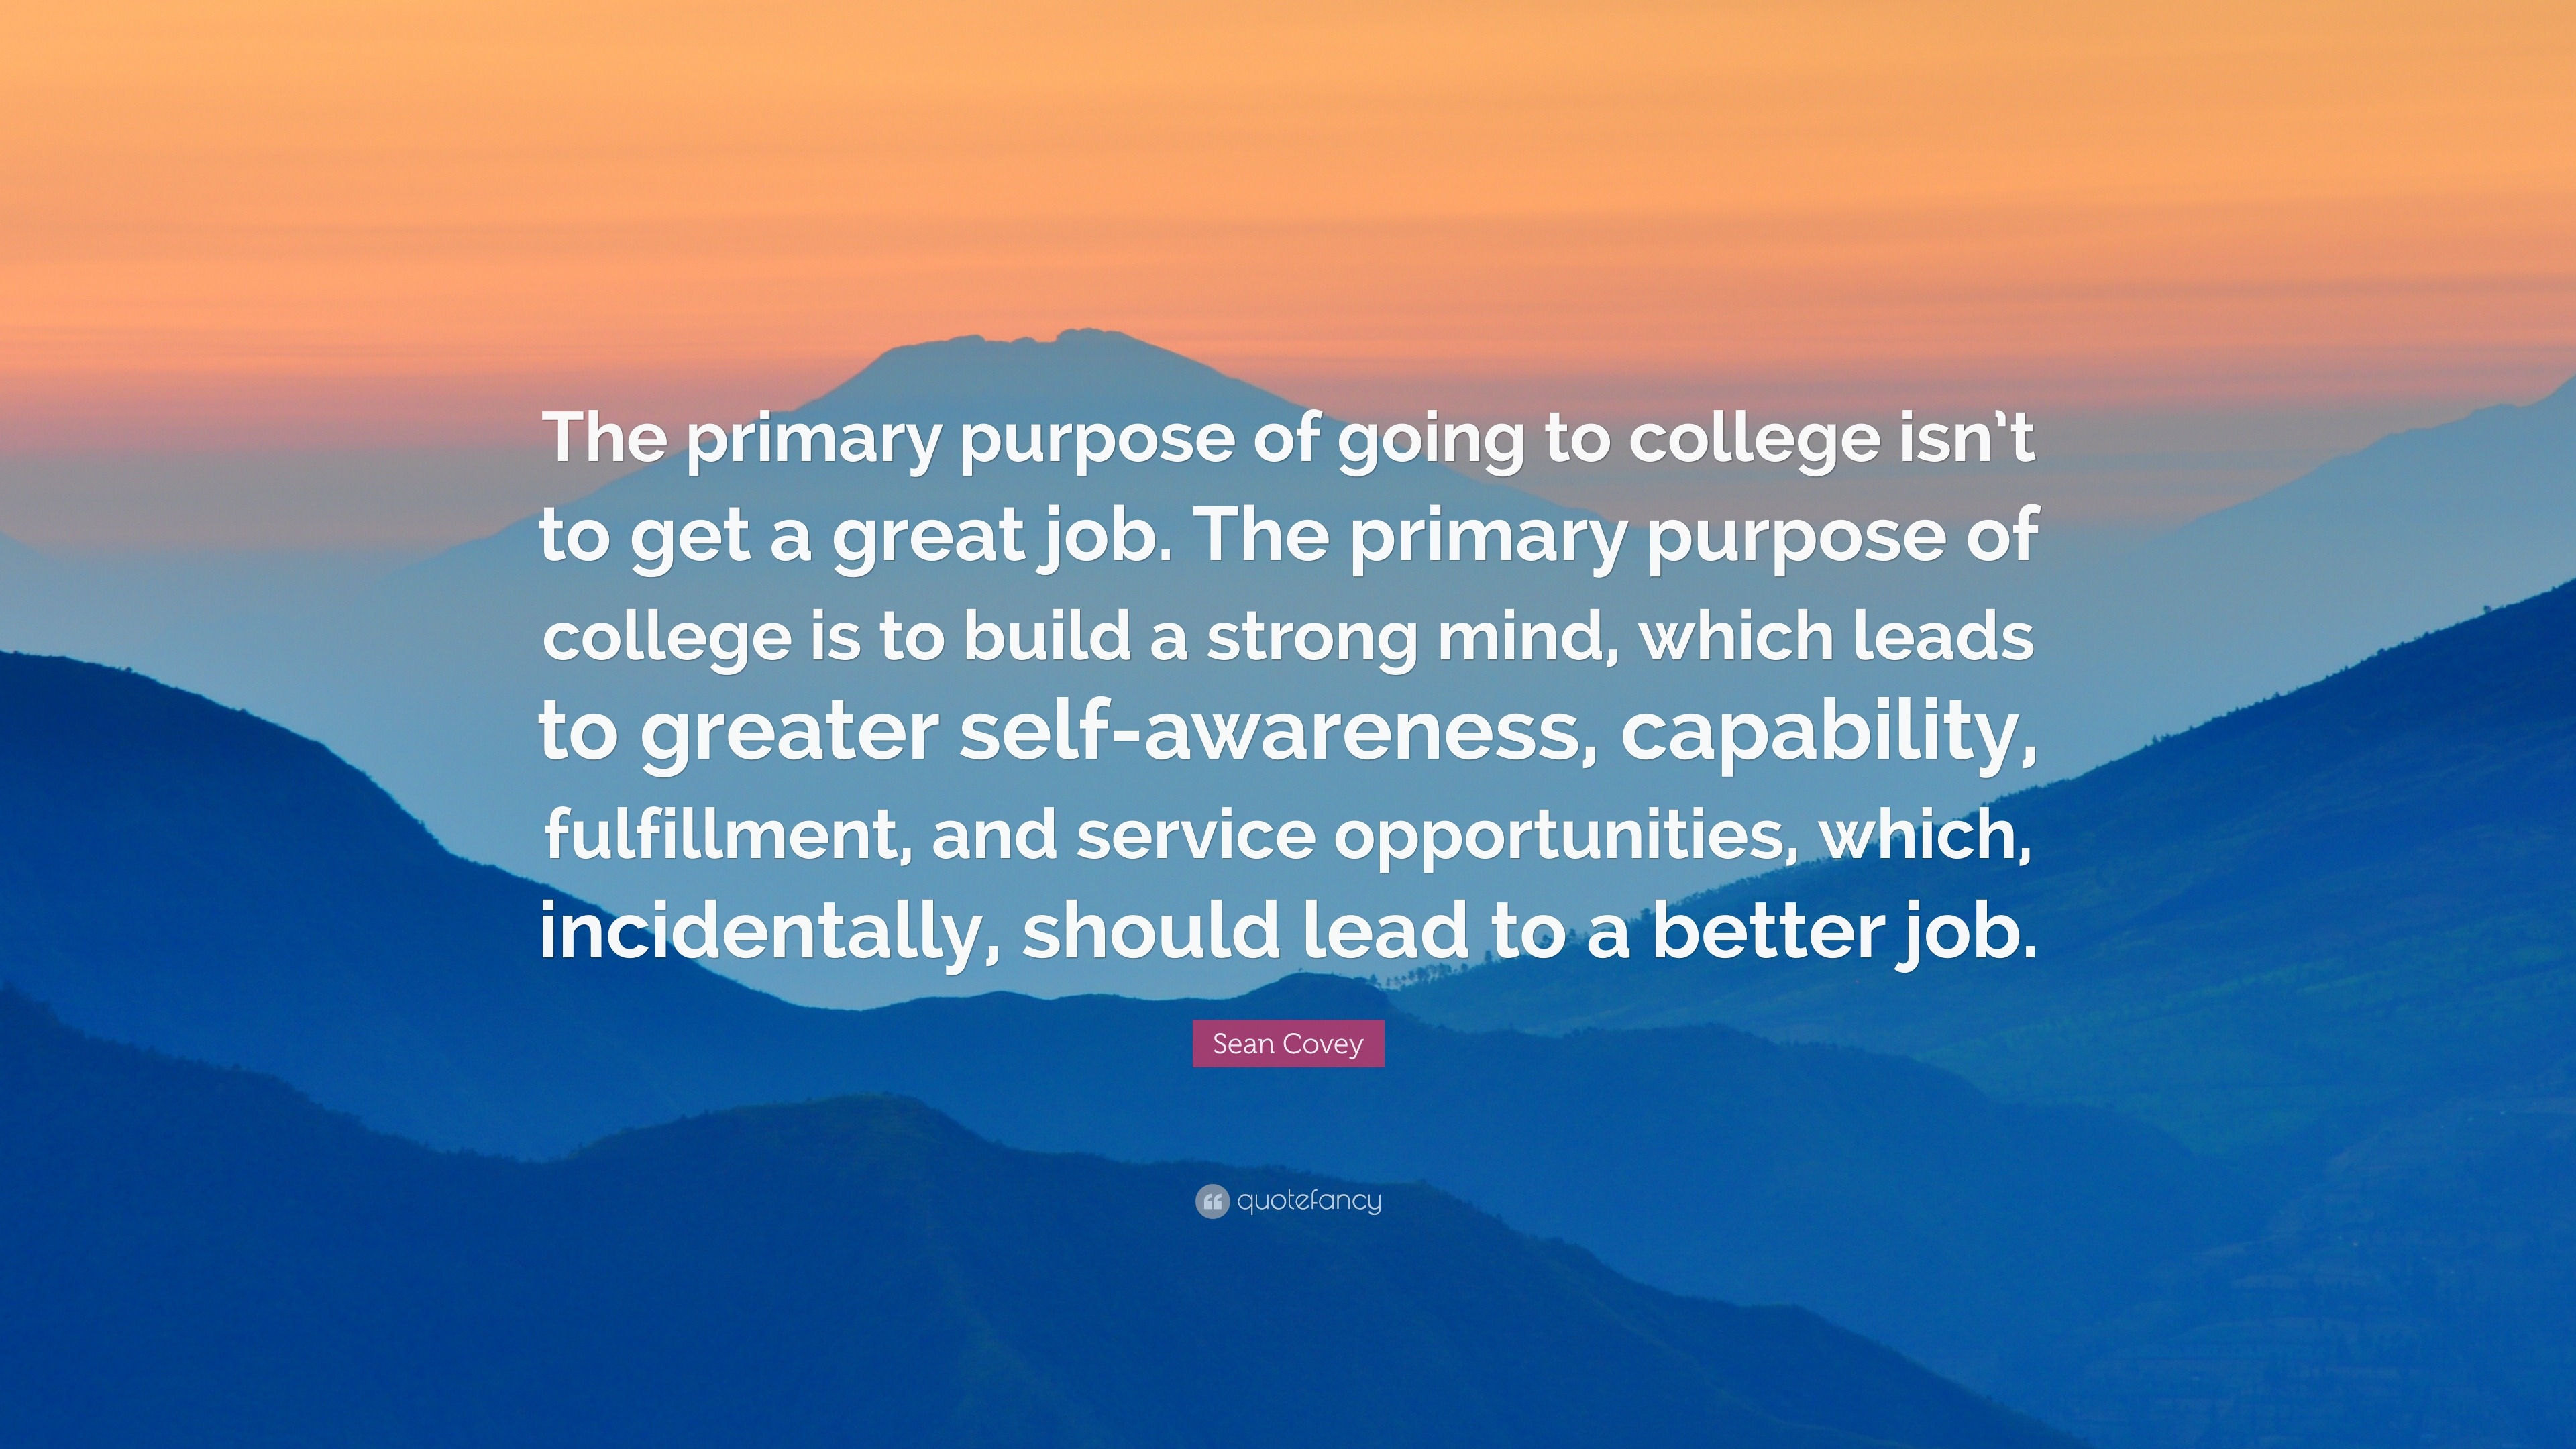 Sean Covey Quote: “The primary purpose of going to college isn’t to get ...